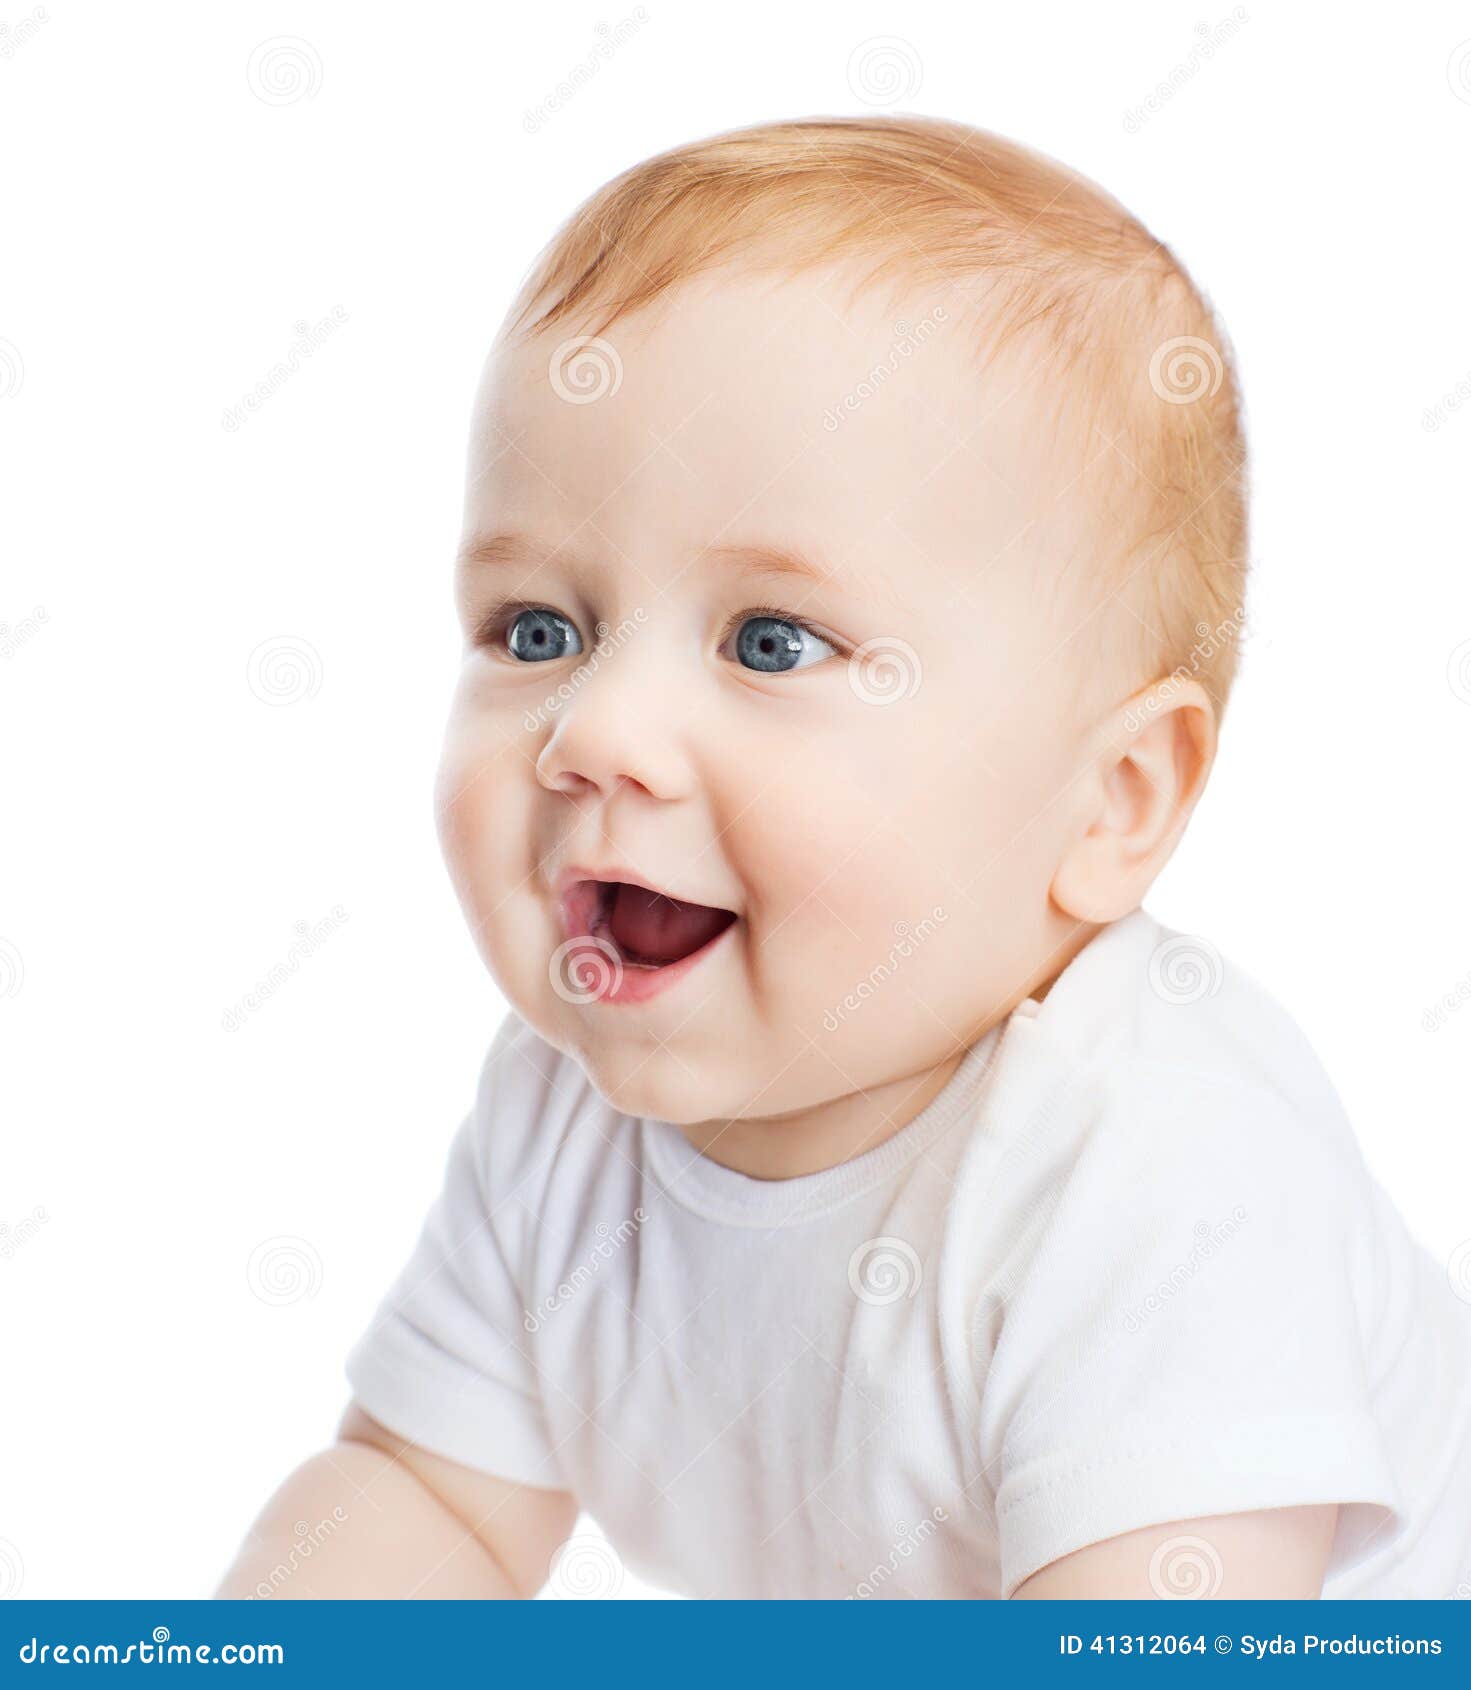 Smiling little baby stock photo. Image of funny, childhood - 41312064